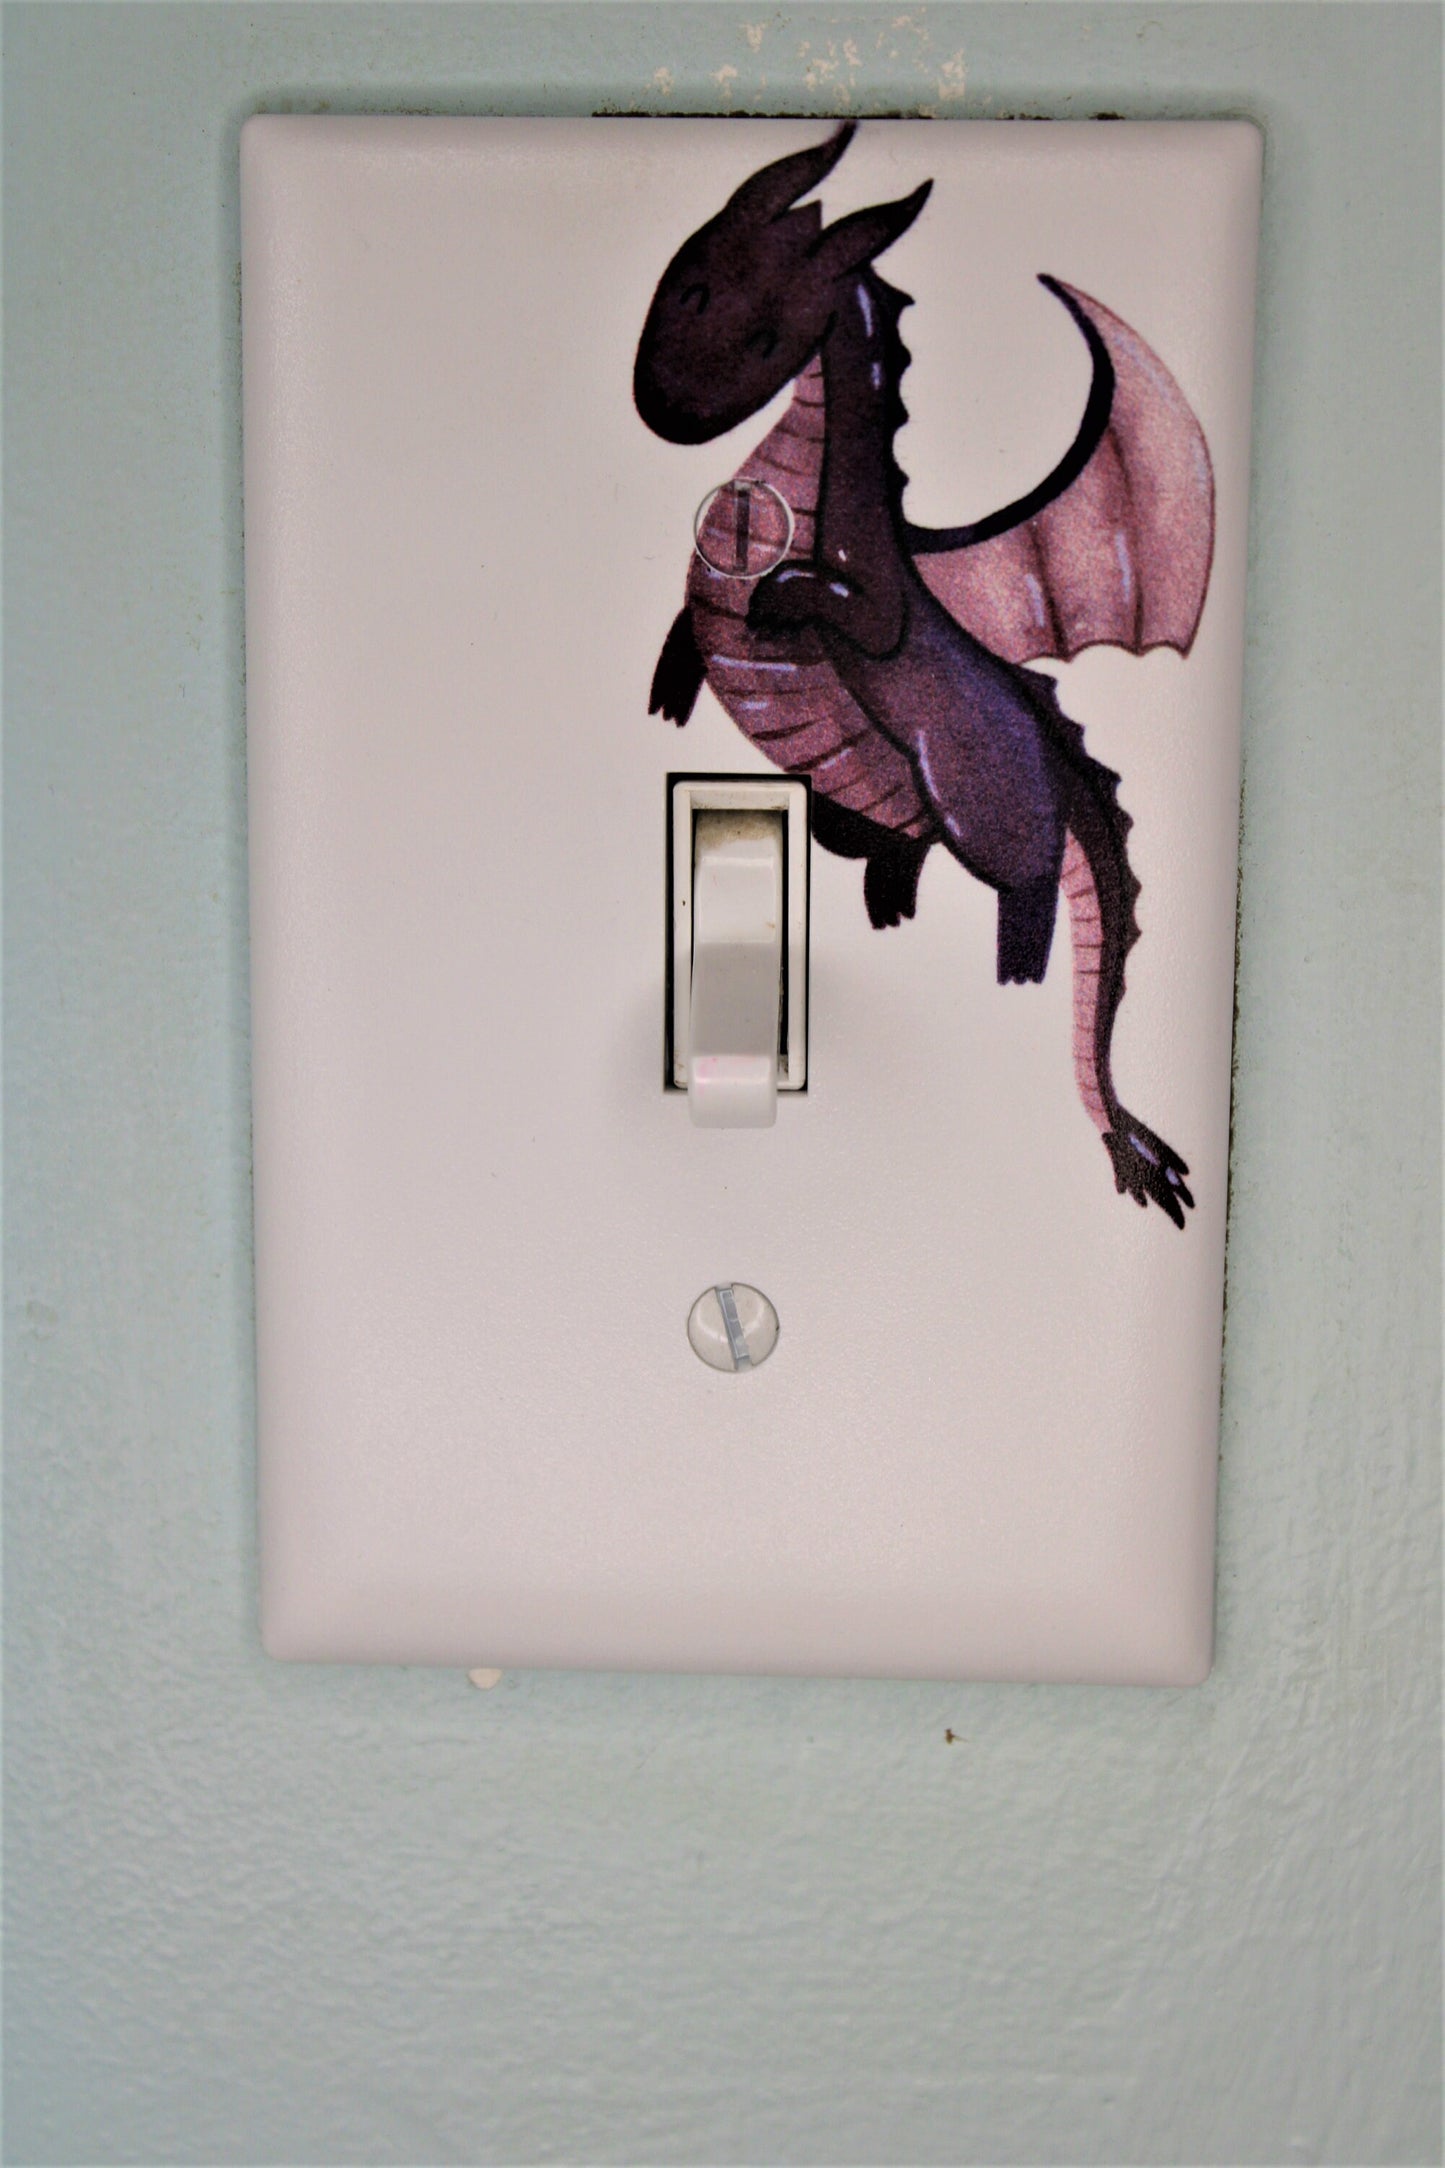 flying cute purple dragon cartoon prince princess room decor unique custom printed in color light switch plate cover durable fairytale theme